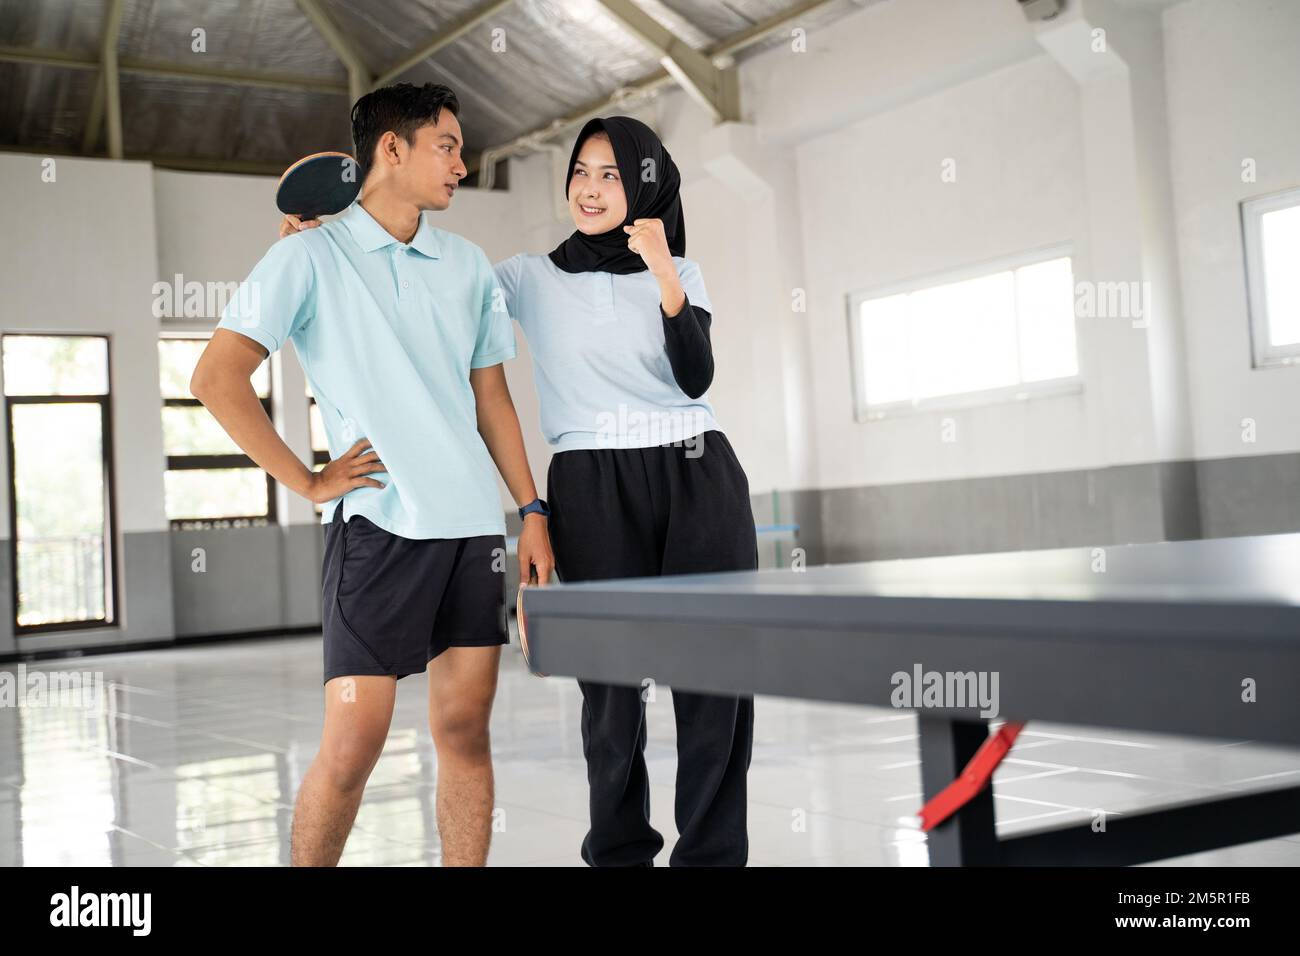 female ping pong athlete in hijab cheers on male partner Stock Photo